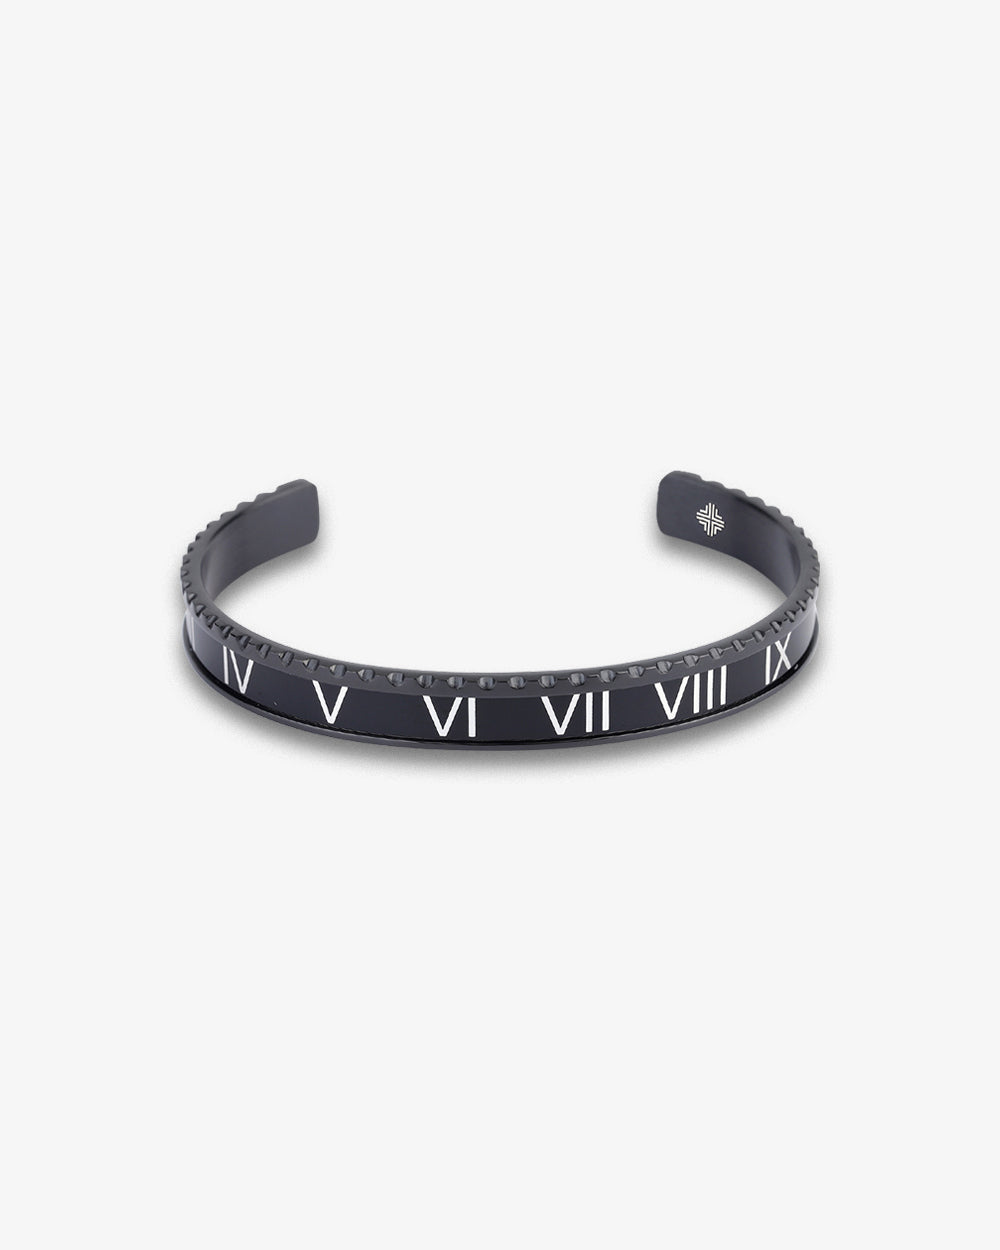 Swiss Concept Classic Roman Numeral Speed Bracelet (Black & Black Gold) - Stainless Steel